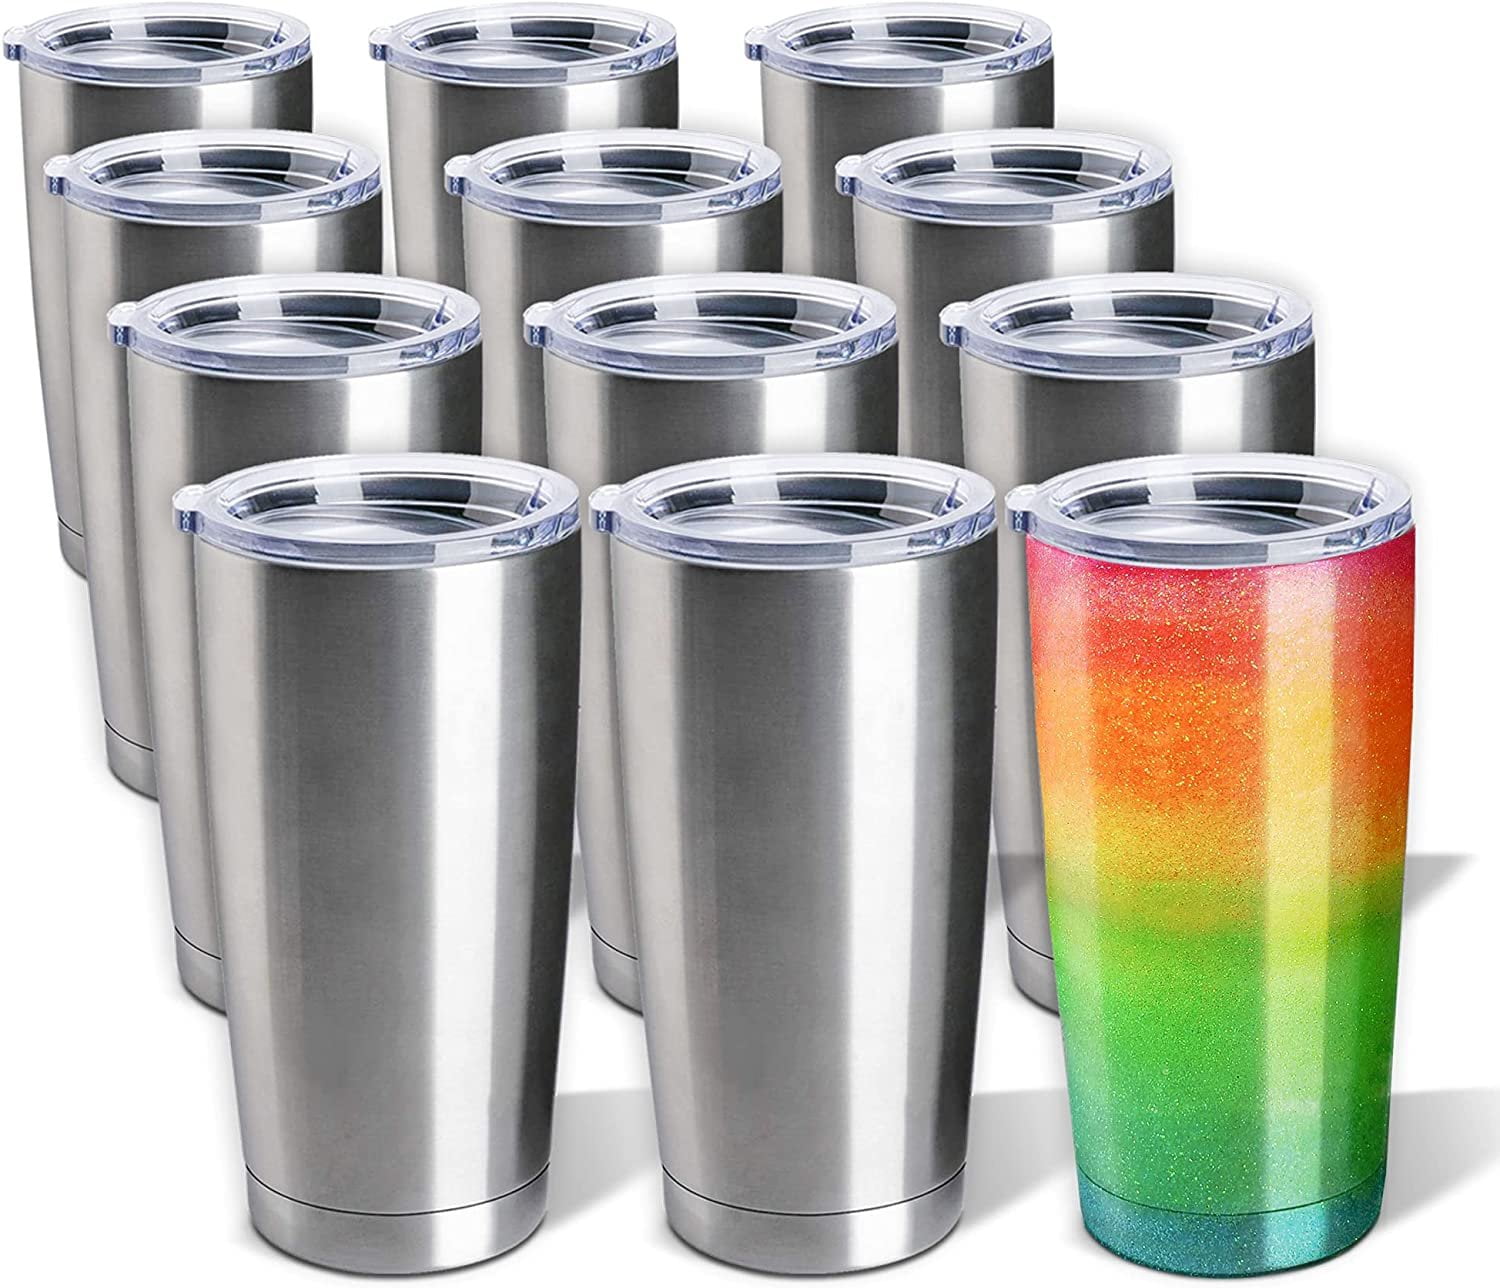 8 Pieces Stainless Steel Whiskey Glass Whiskey Glass Bulk 6.8 oz Insulated  Metal Cups Double Wall Tu…See more 8 Pieces Stainless Steel Whiskey Glass